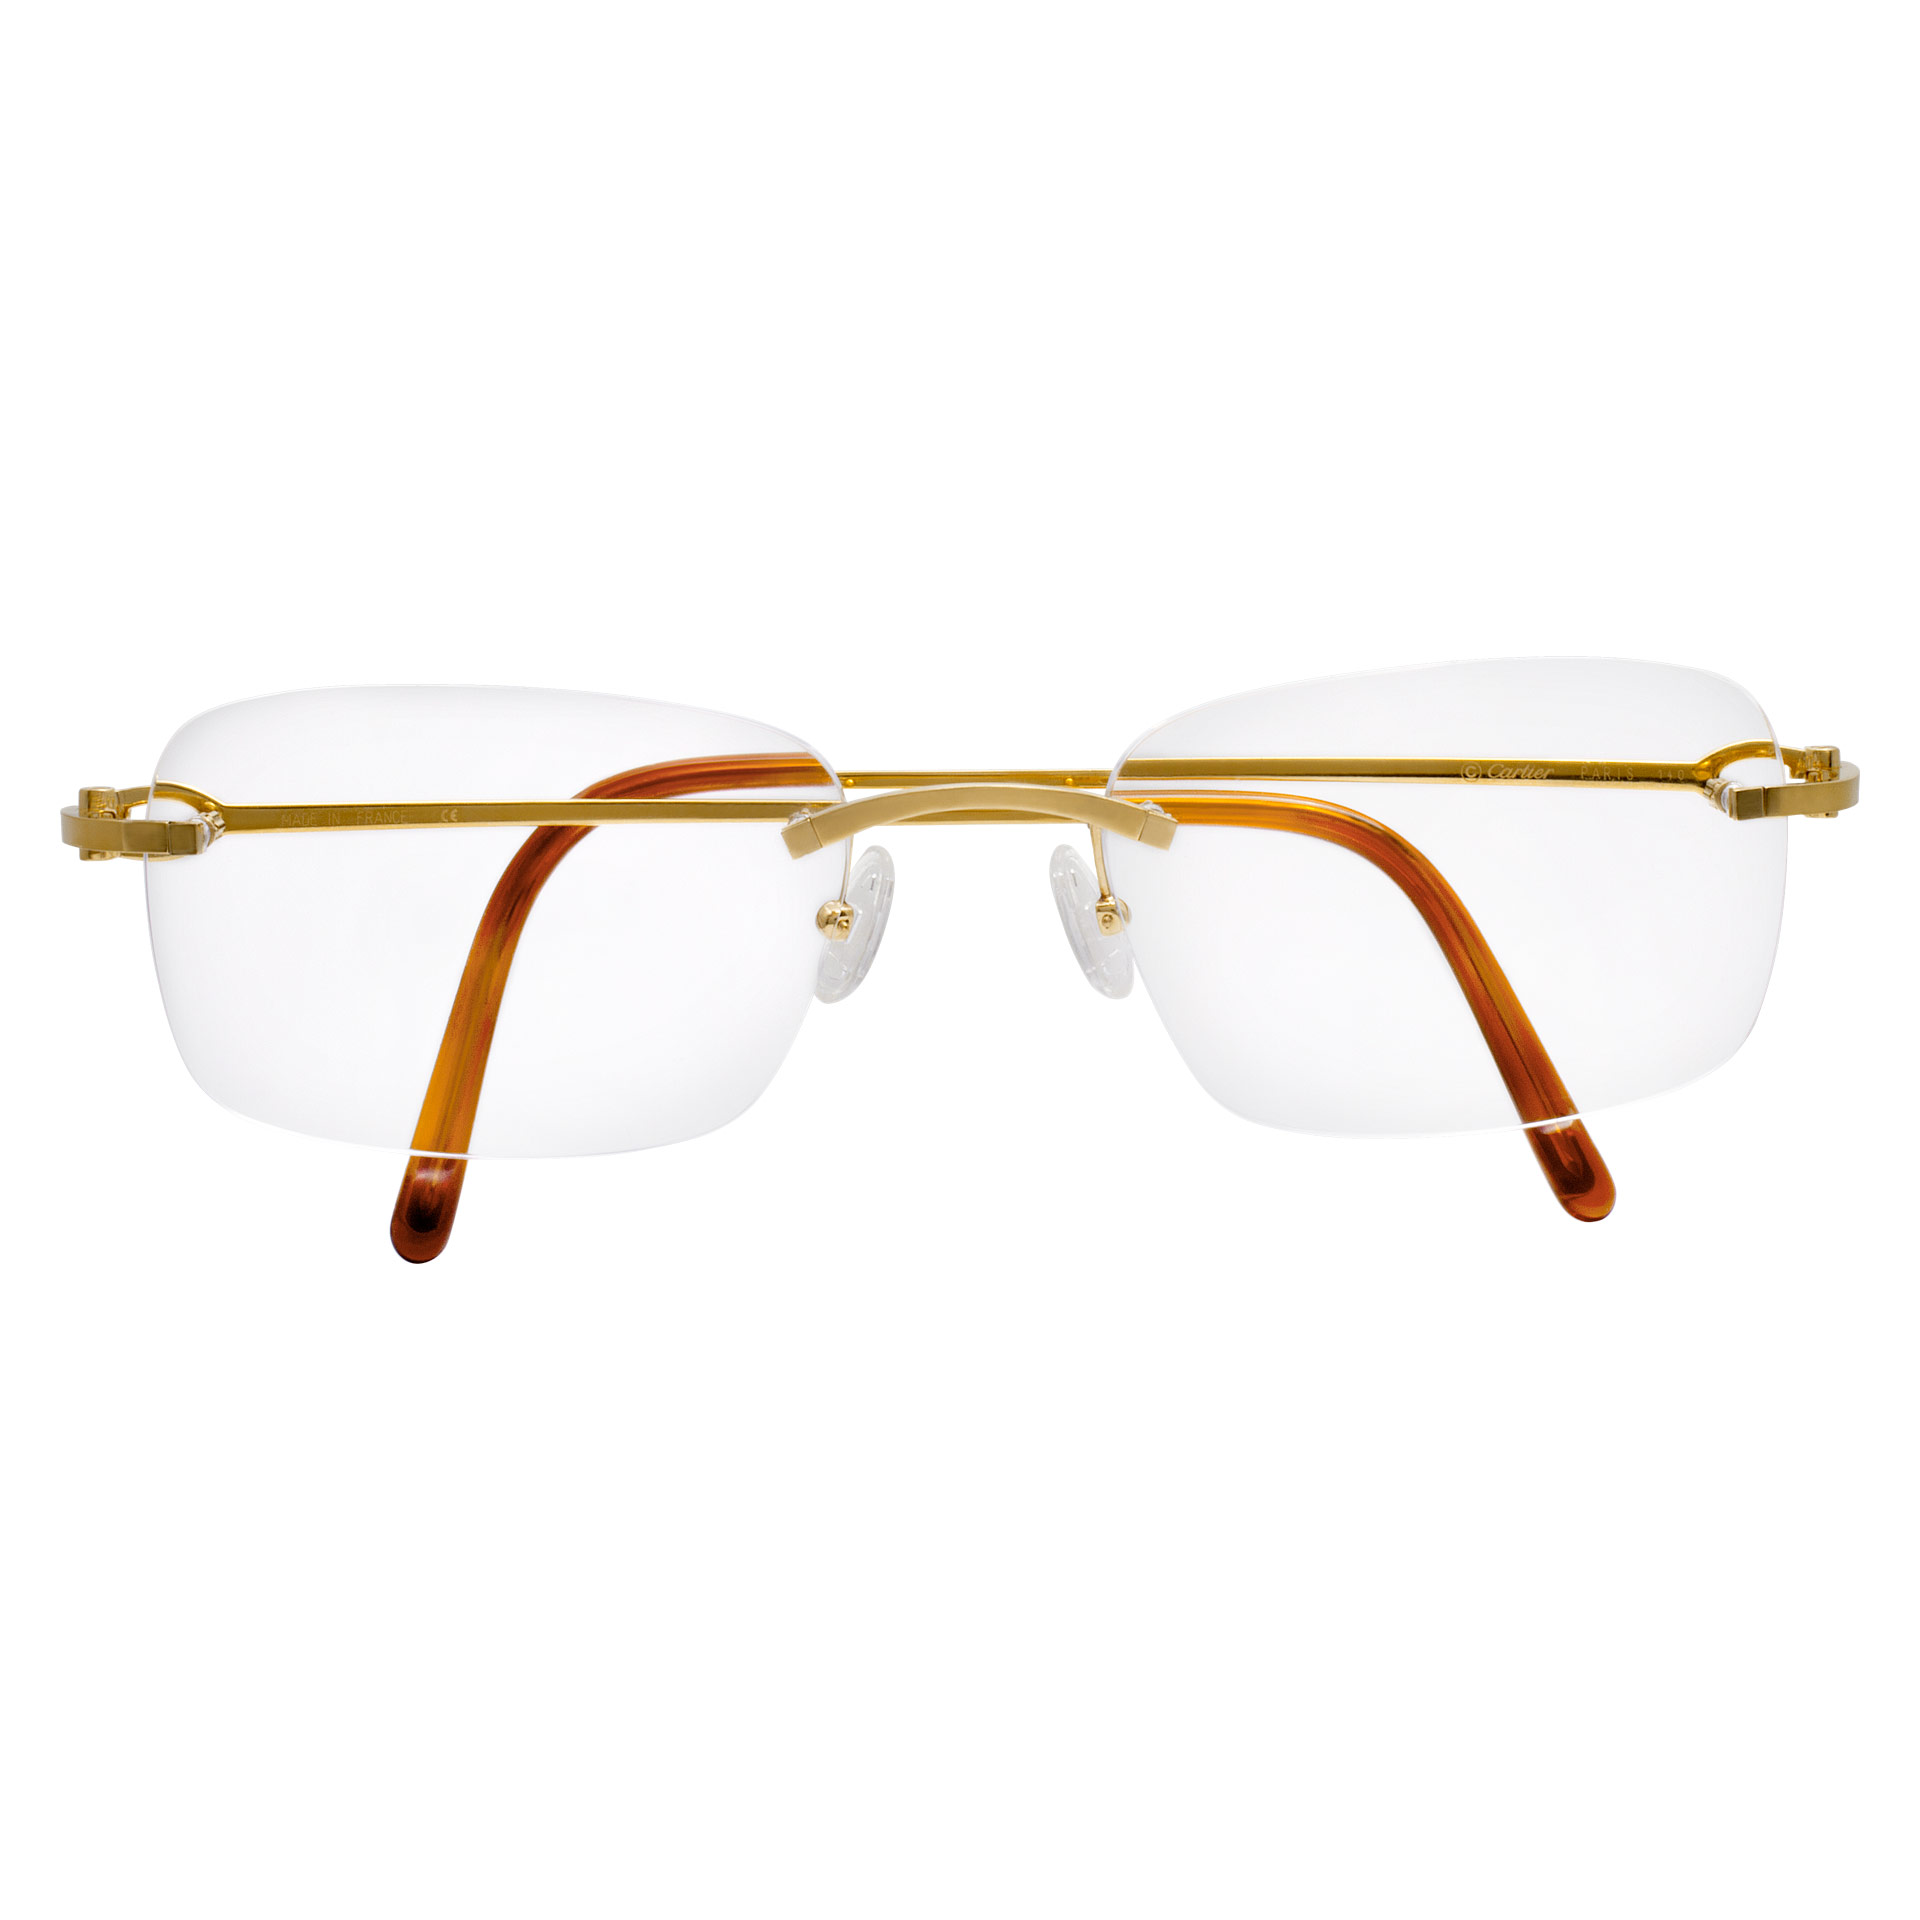 Cartier glasses in 18k gold plated frame.